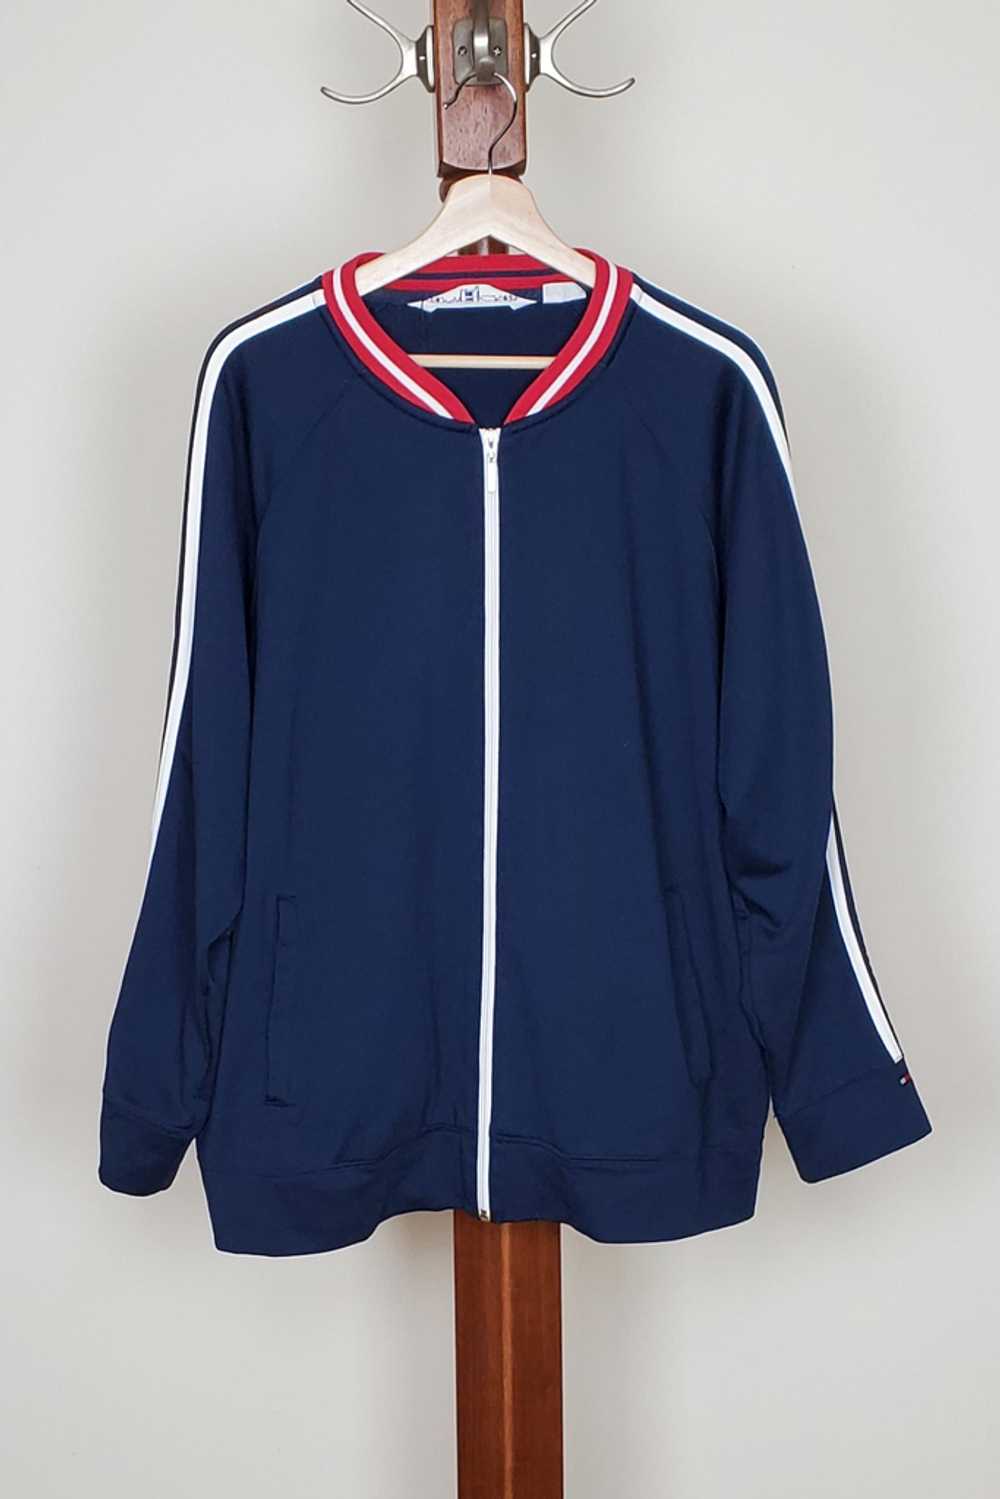 Unisex Jacket by Tommy Hilfiger Woman - image 1